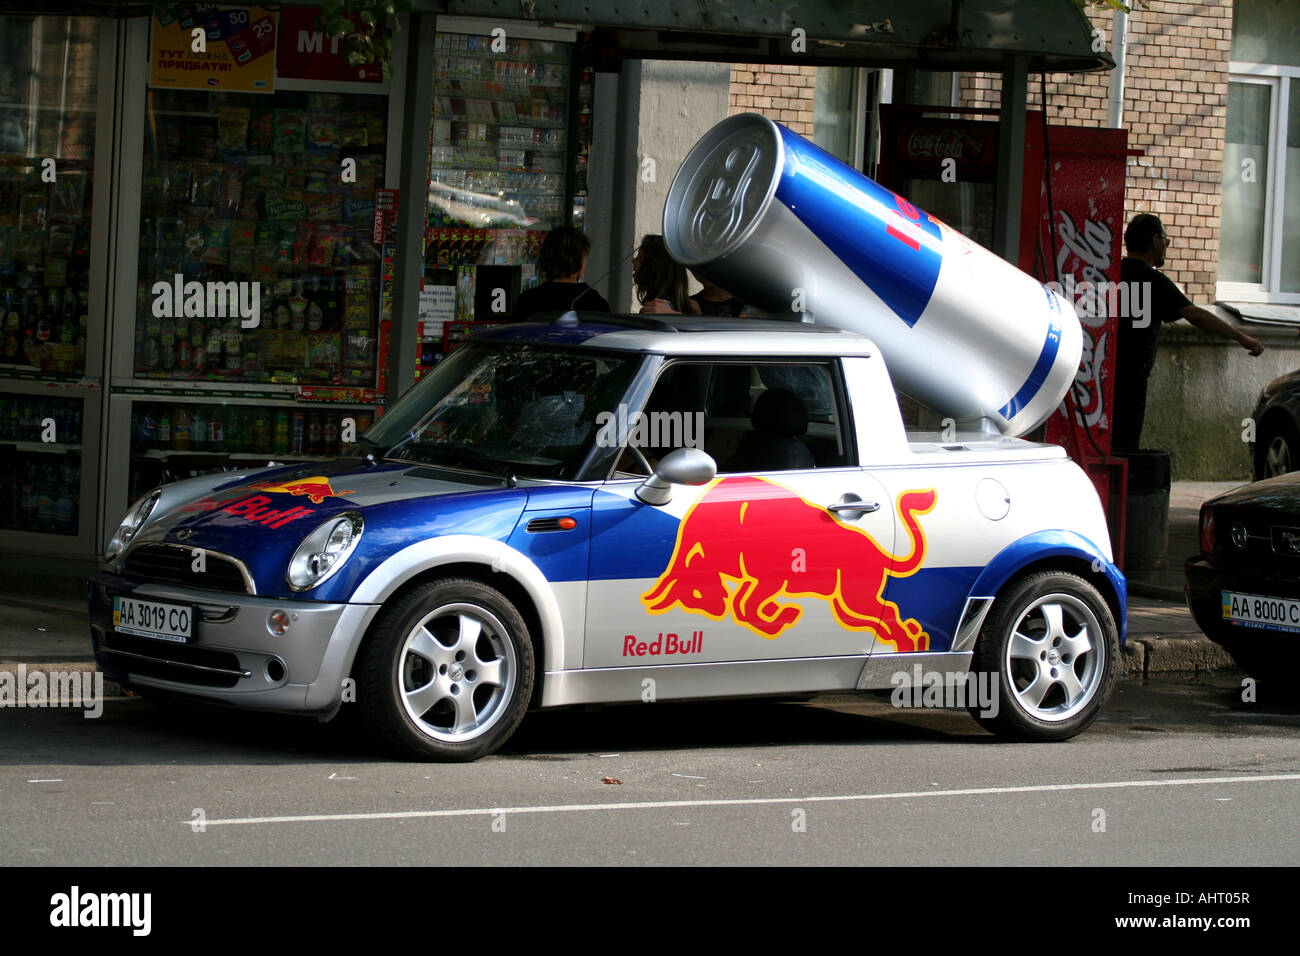 Red Bull promotional Mini Cooper with a giant can on its roof parked in Kyiv, Ukraine, outside a convenience store. Stock Photo